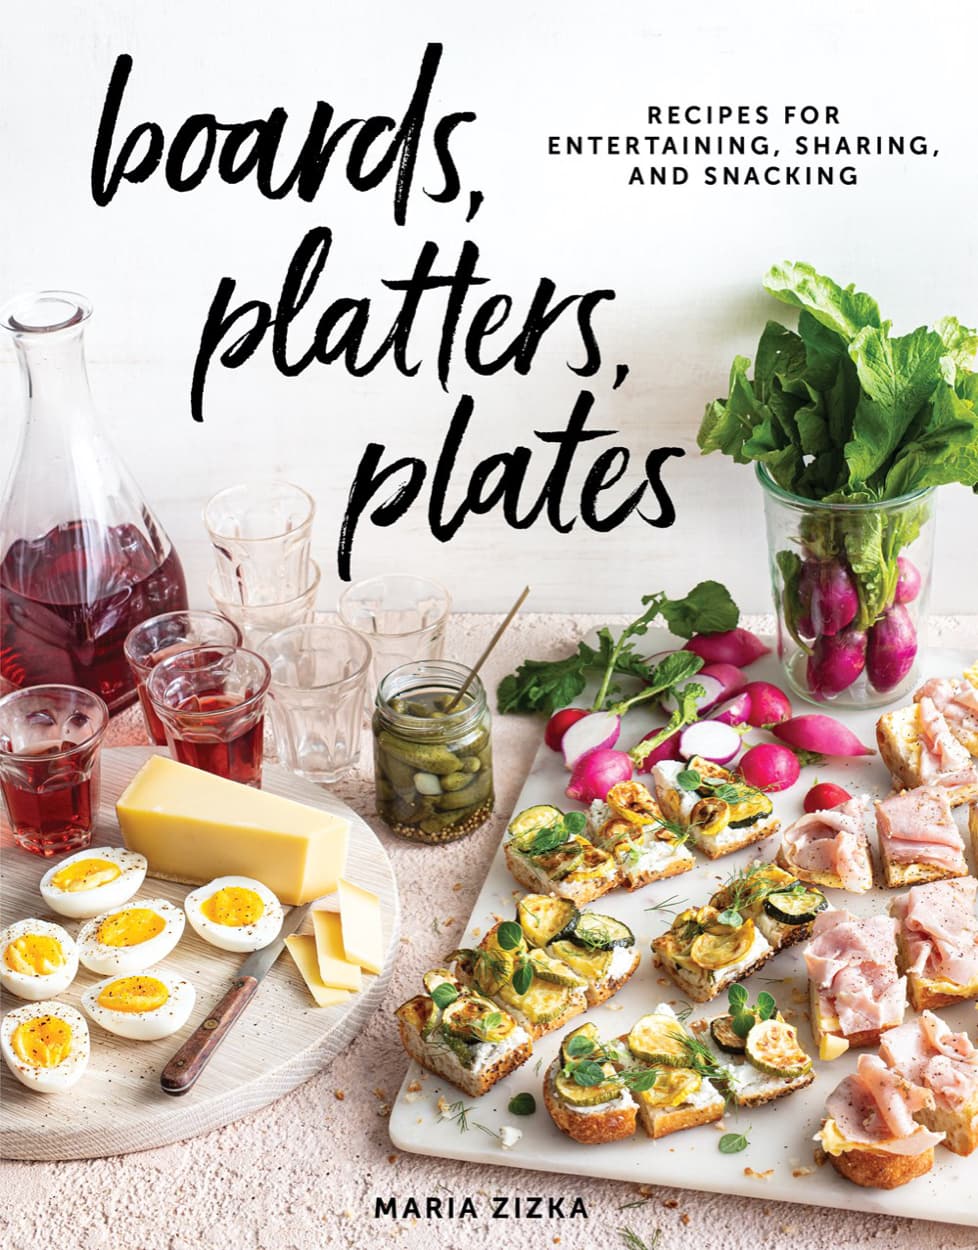 Boards, Platters, Plates Recipes for Entertaining, Sharing, and Snacking by Maria Zizka